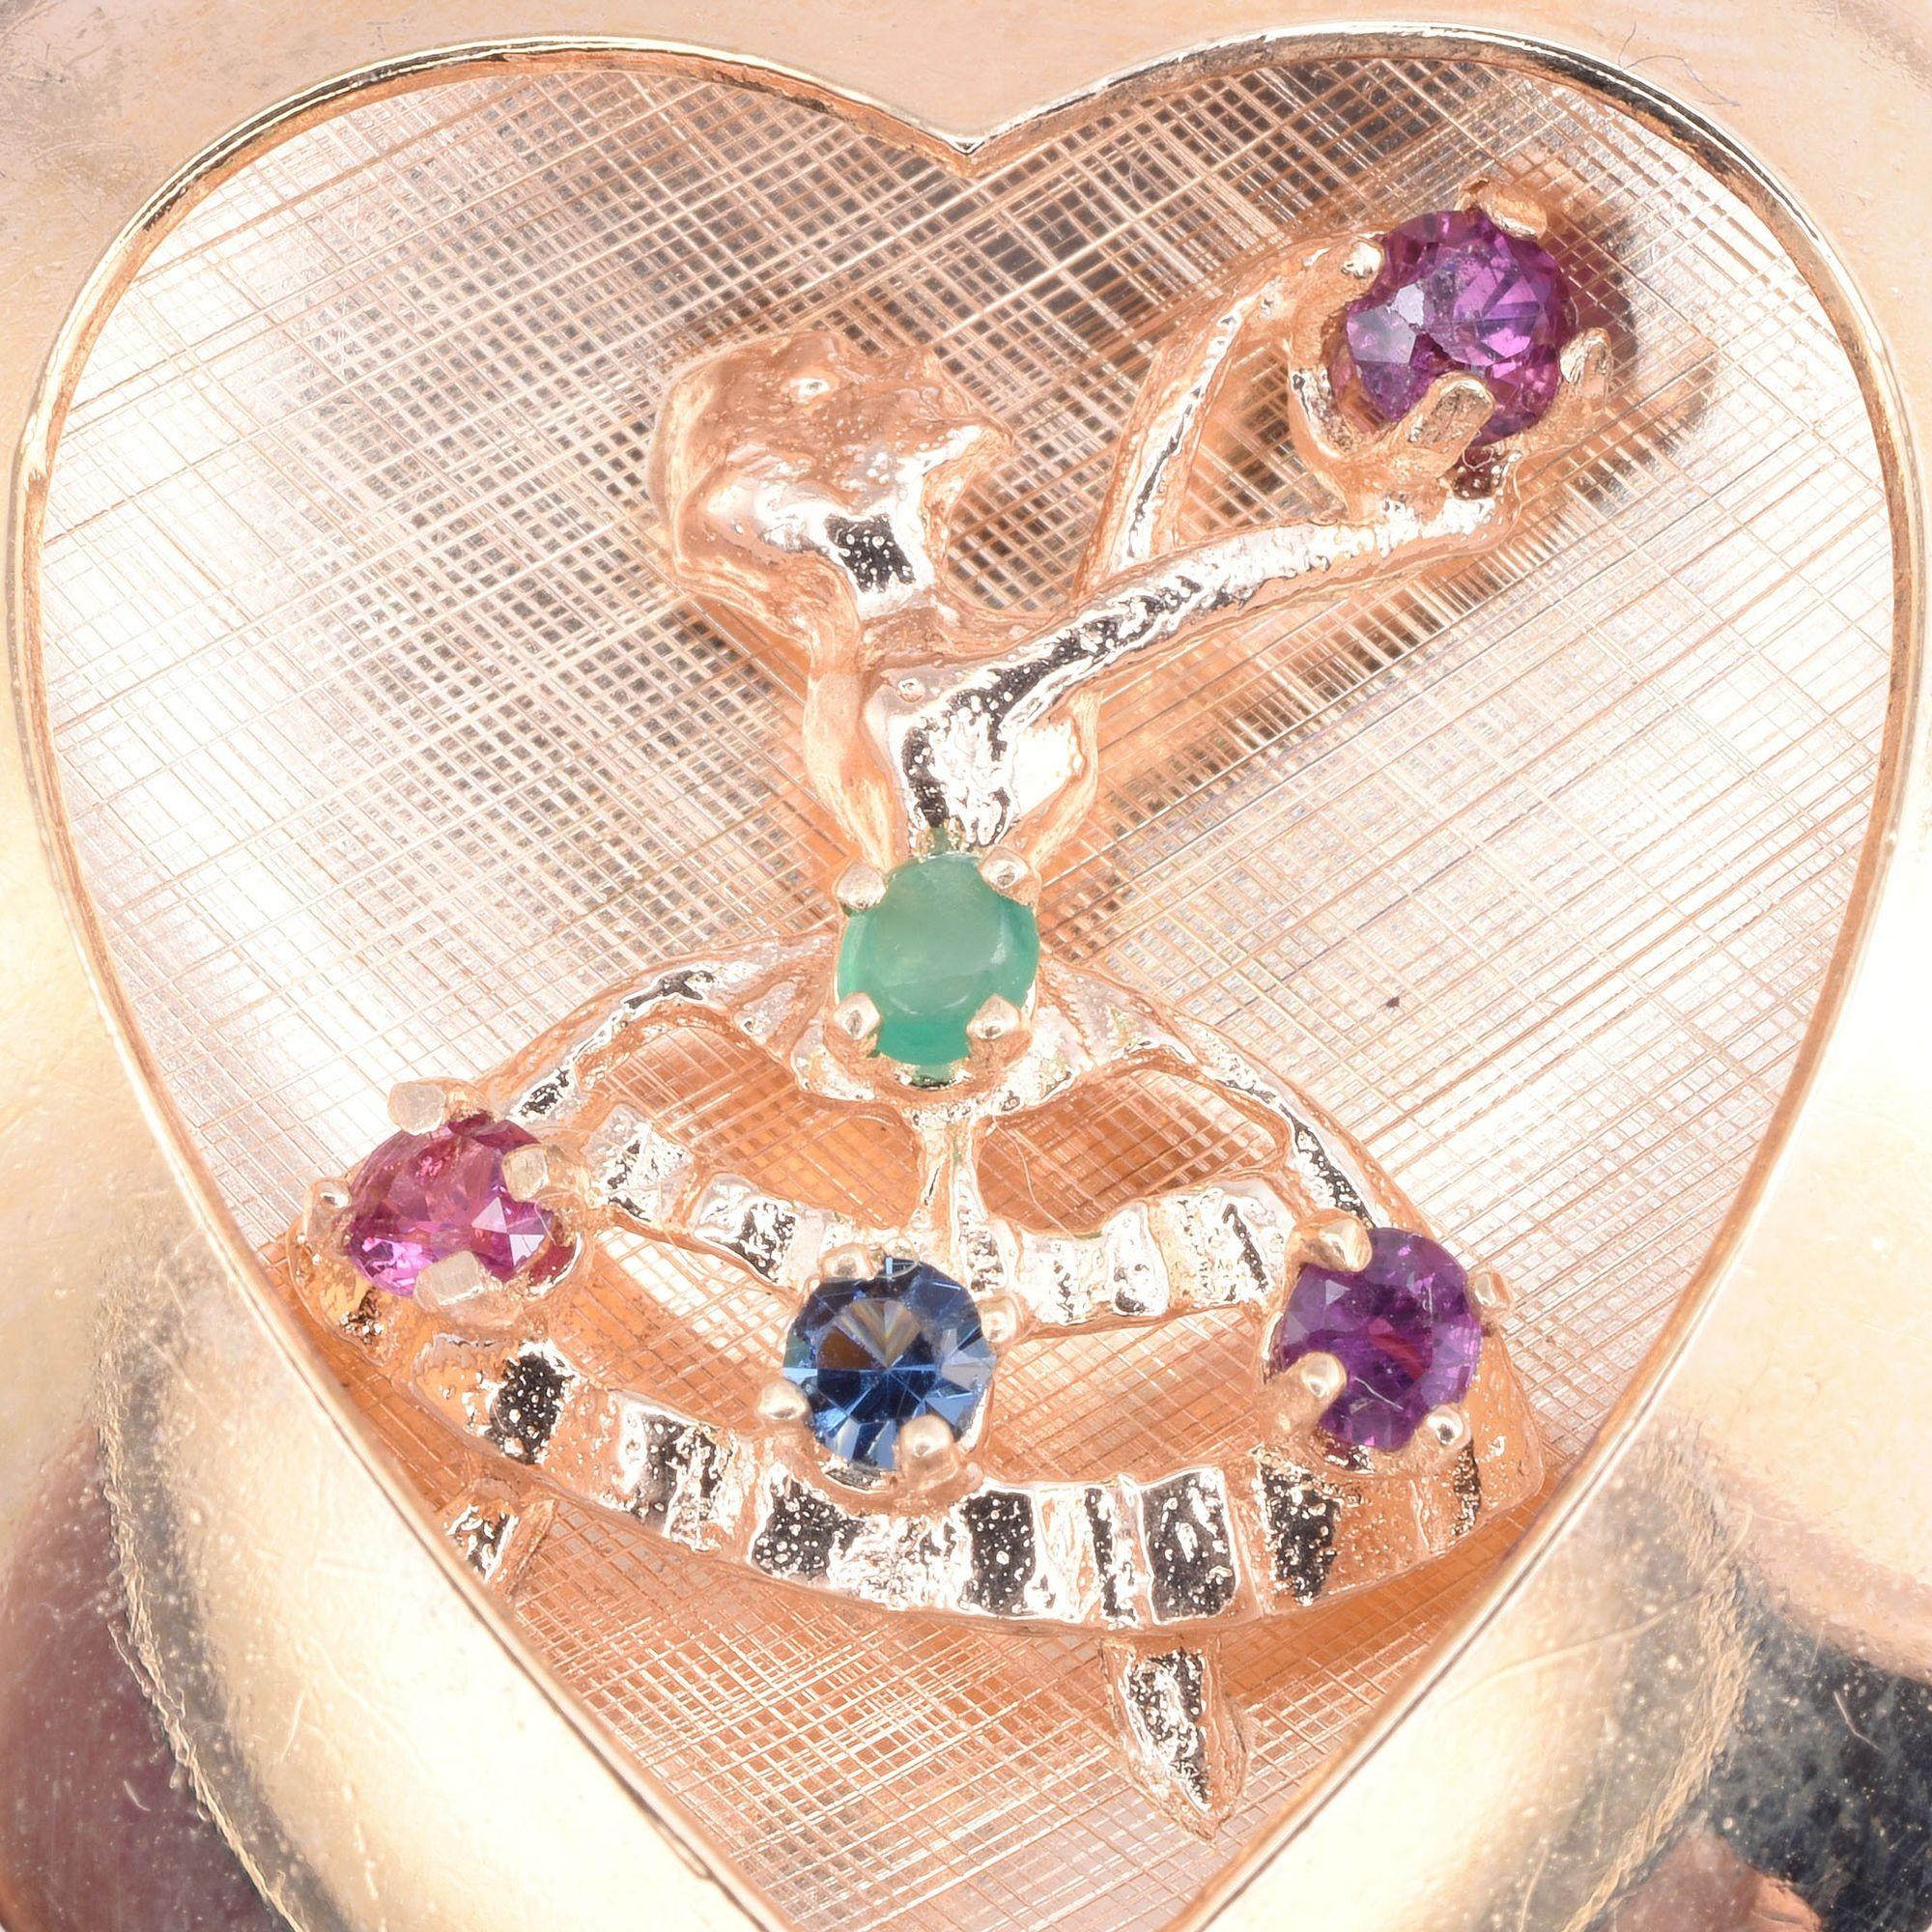 Vintage 14K heart with dancer charm or pendant, circa 1950. This vintage heart charm or pendant is crafted in 14 karat gold and features a dancing lady accented with colored stones. [KIMH 542]